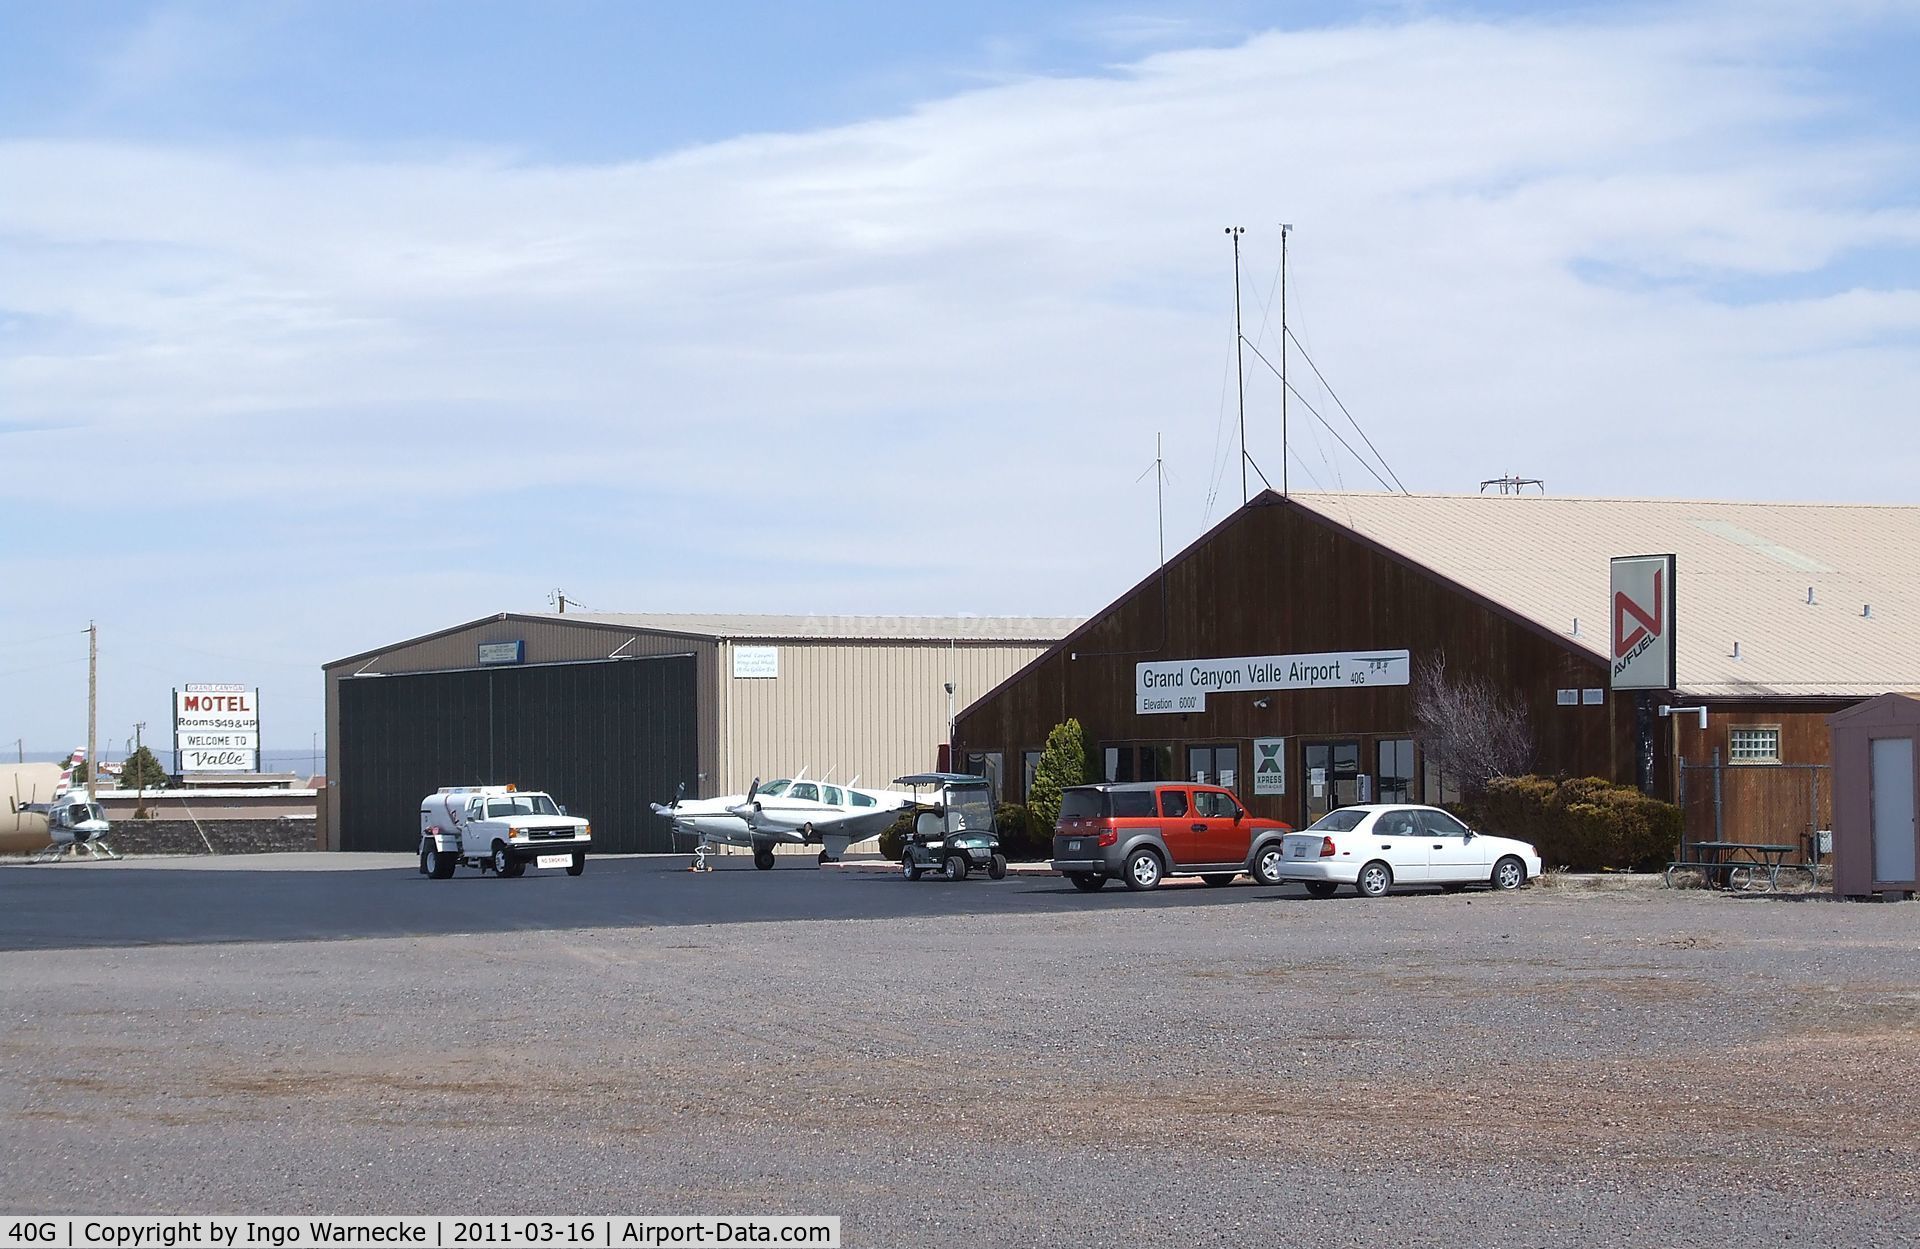 Valle Airport (40G) - terminal building and hangar of Valle airport